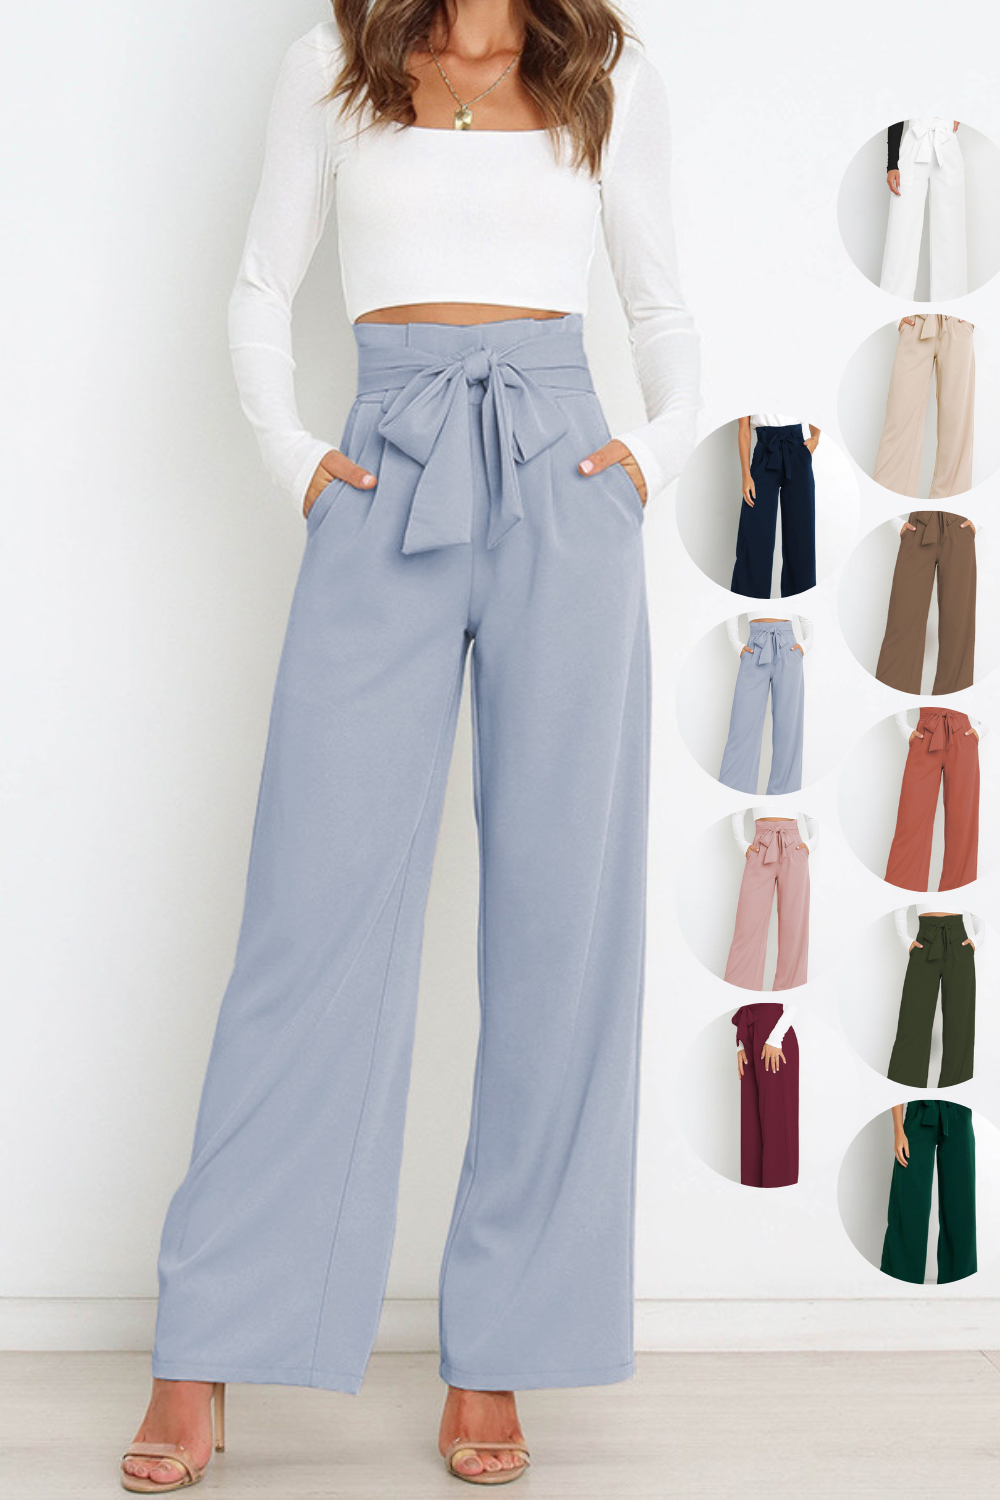 Womens Misses Dress Pants Trousers with Pockets, Paperbag Tie Waist, Wide Leg Silhouette, Pleated, several solid colors including Blush Light Pink, Light Sky Blue, Navy Blue, Army Green, Forest Green, Brick Terracotta Rust, White, Dust Storm Ivory Cream Beige Off-White, Taupe Brown Tan, Burgundy Wine